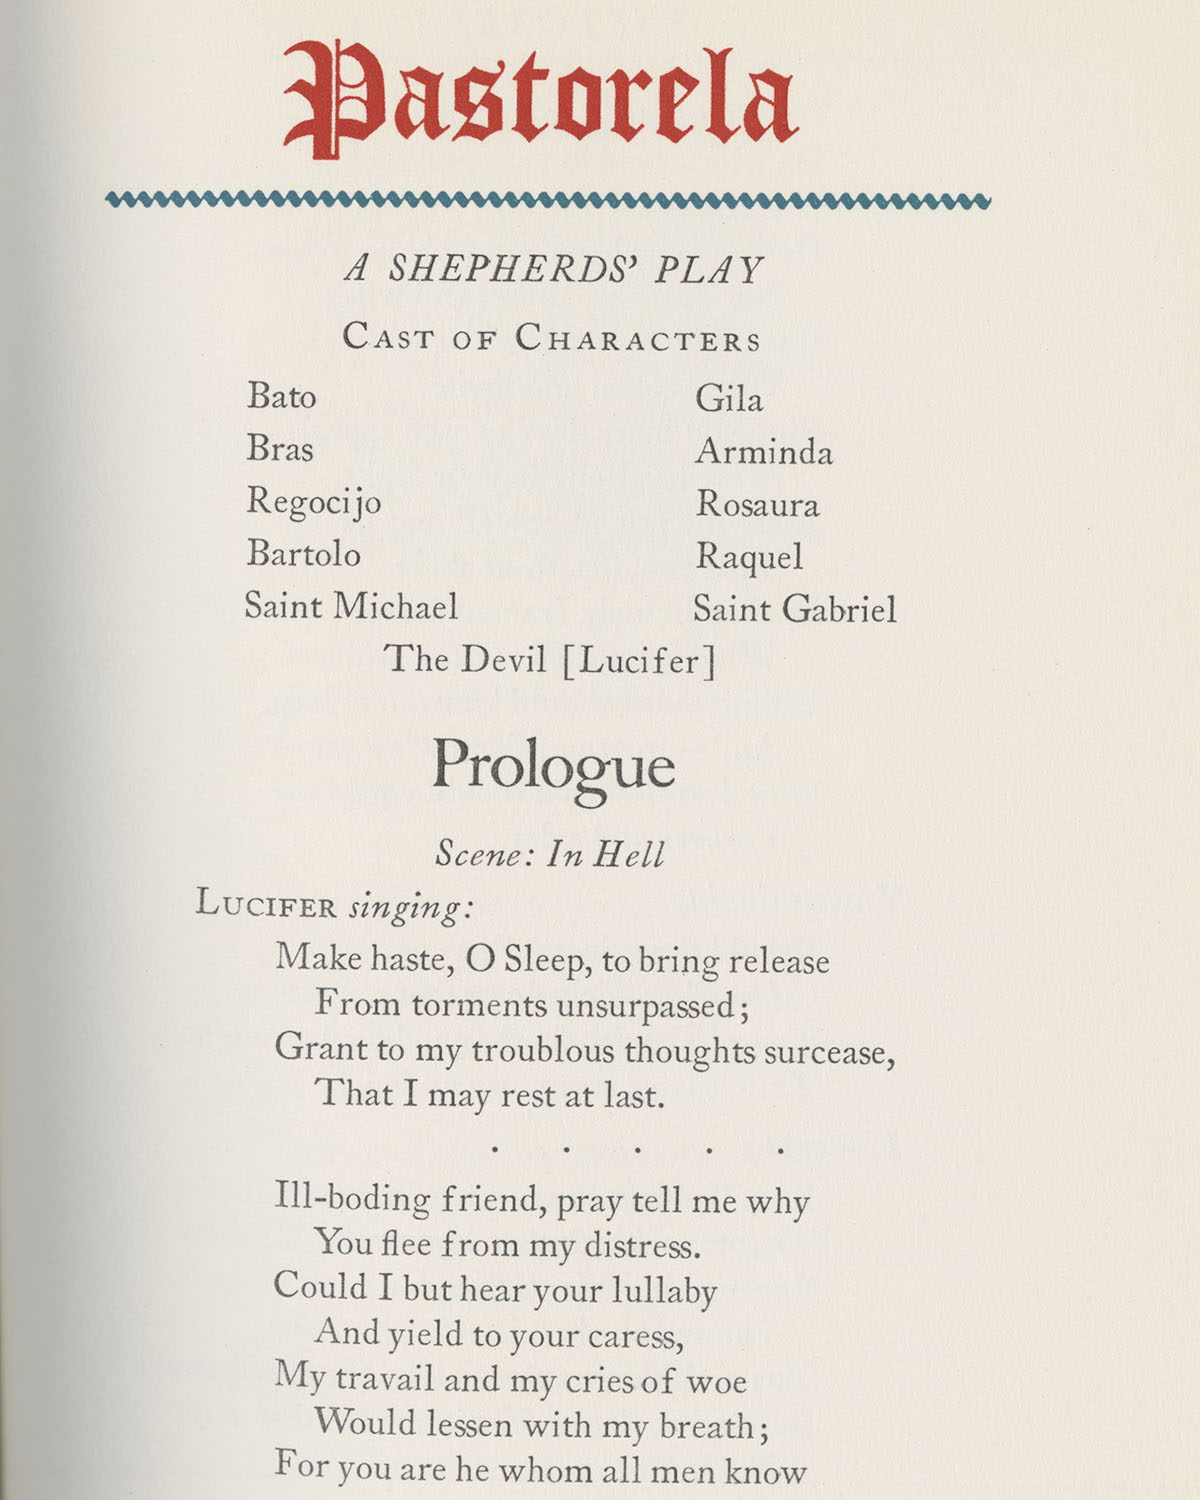 Character list and opening scene of the California Historical Society pastorela.